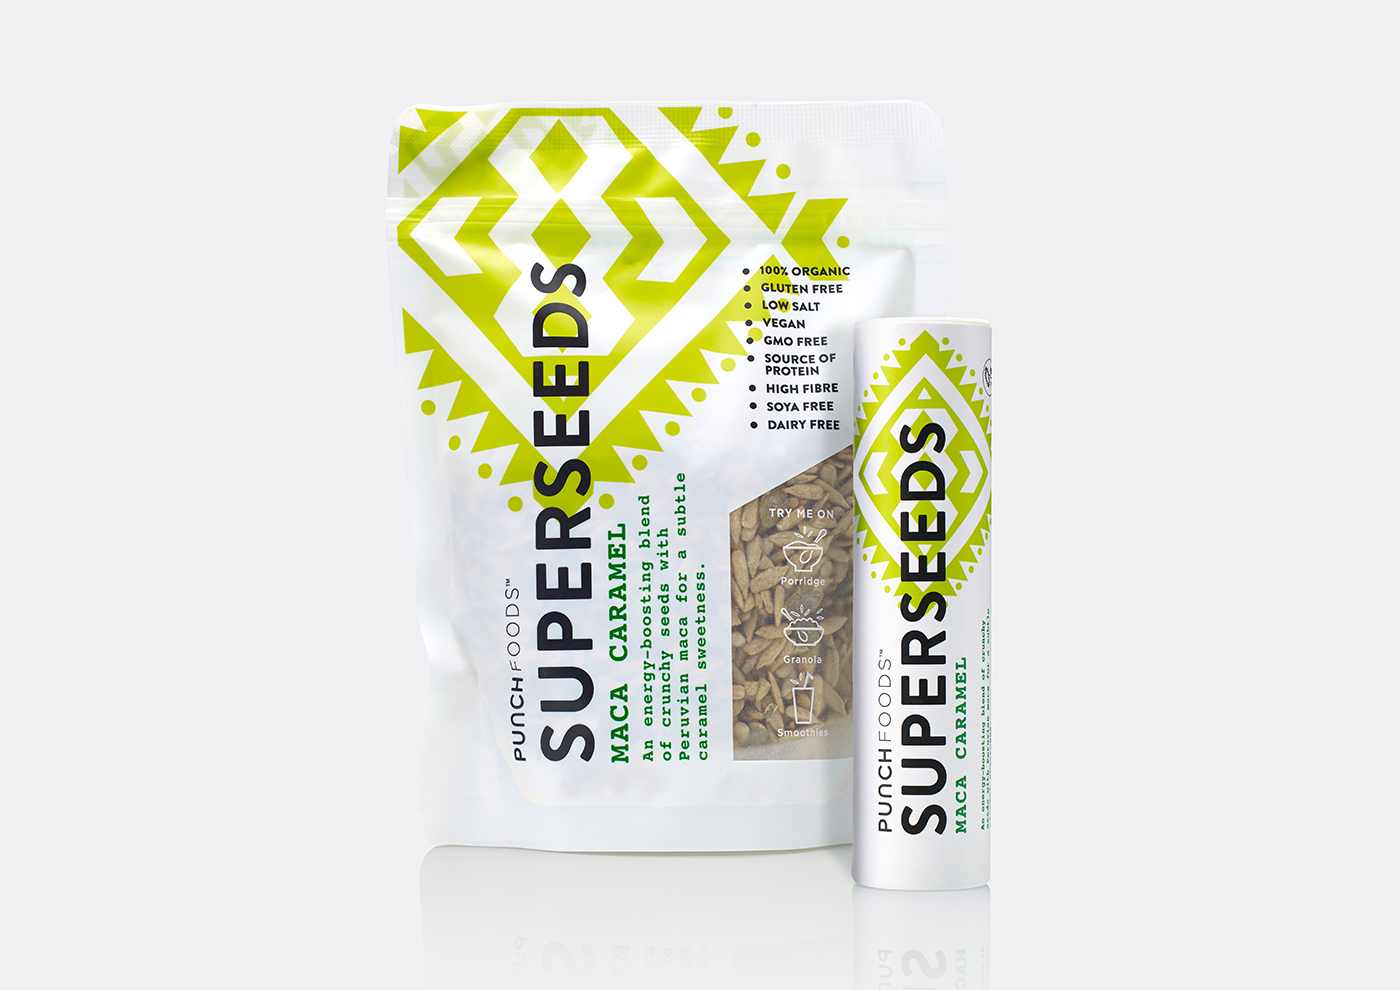 Package design by London based B&B Studio for health food and snack range Superseeds from Punch Foods